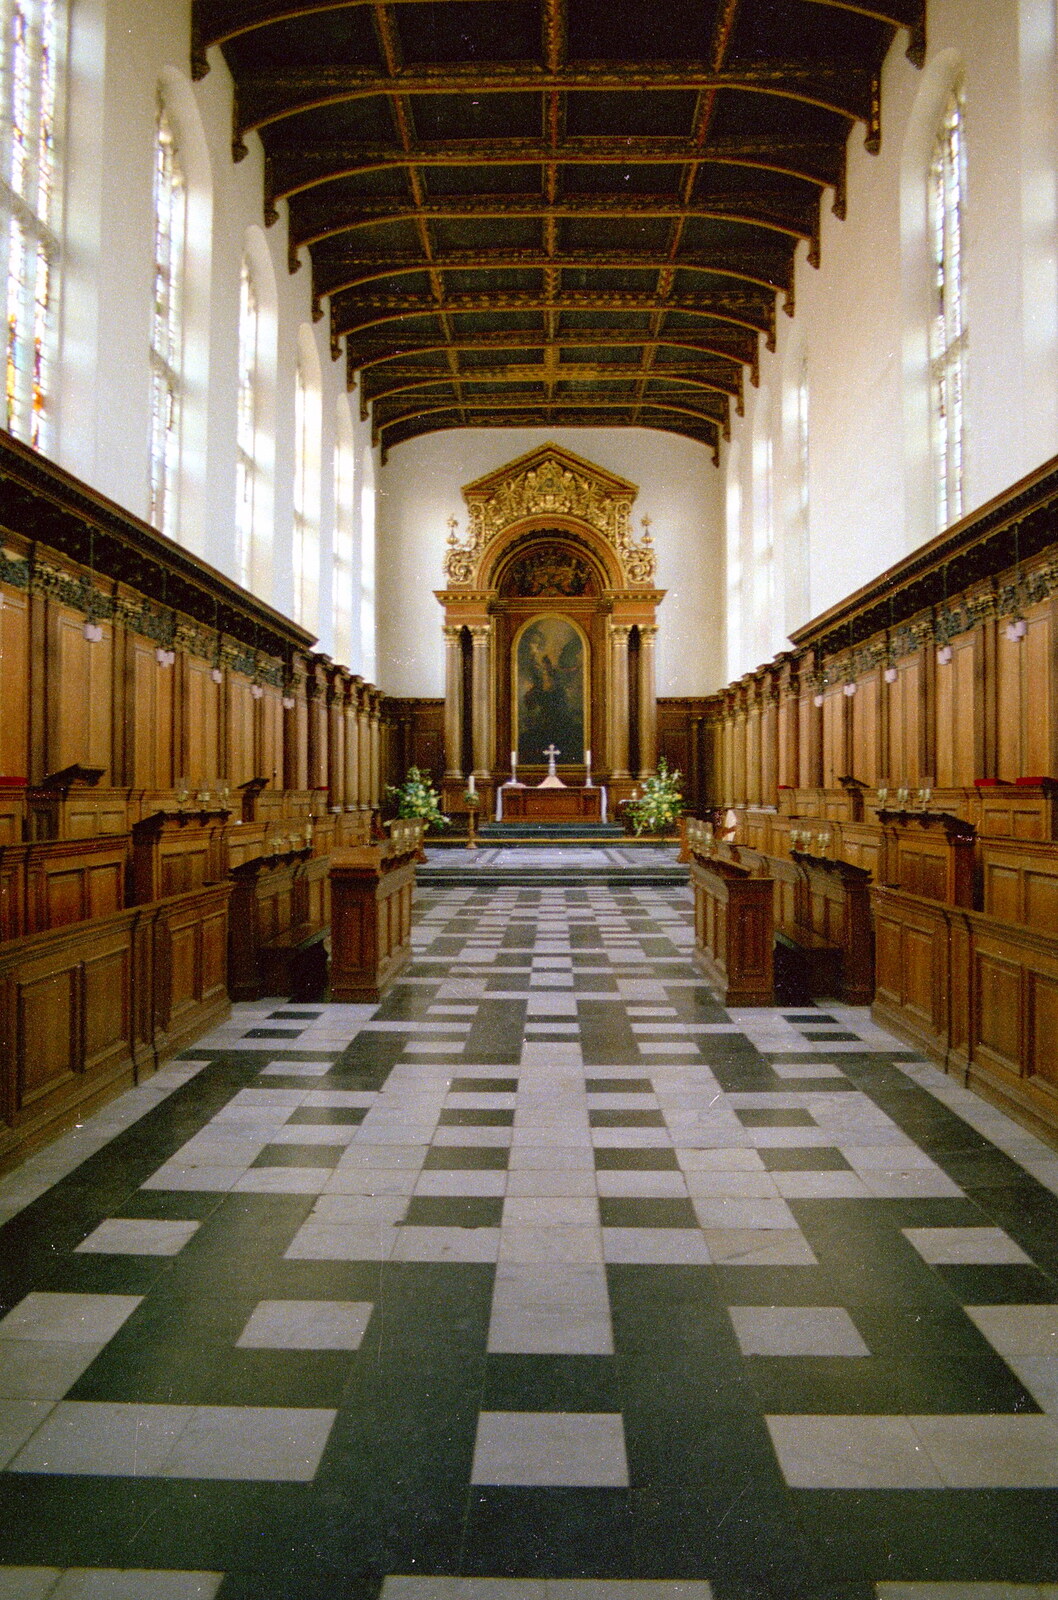 Trinity Chapel from A Trip to Trinity College, Cambridge - 23rd March 1986